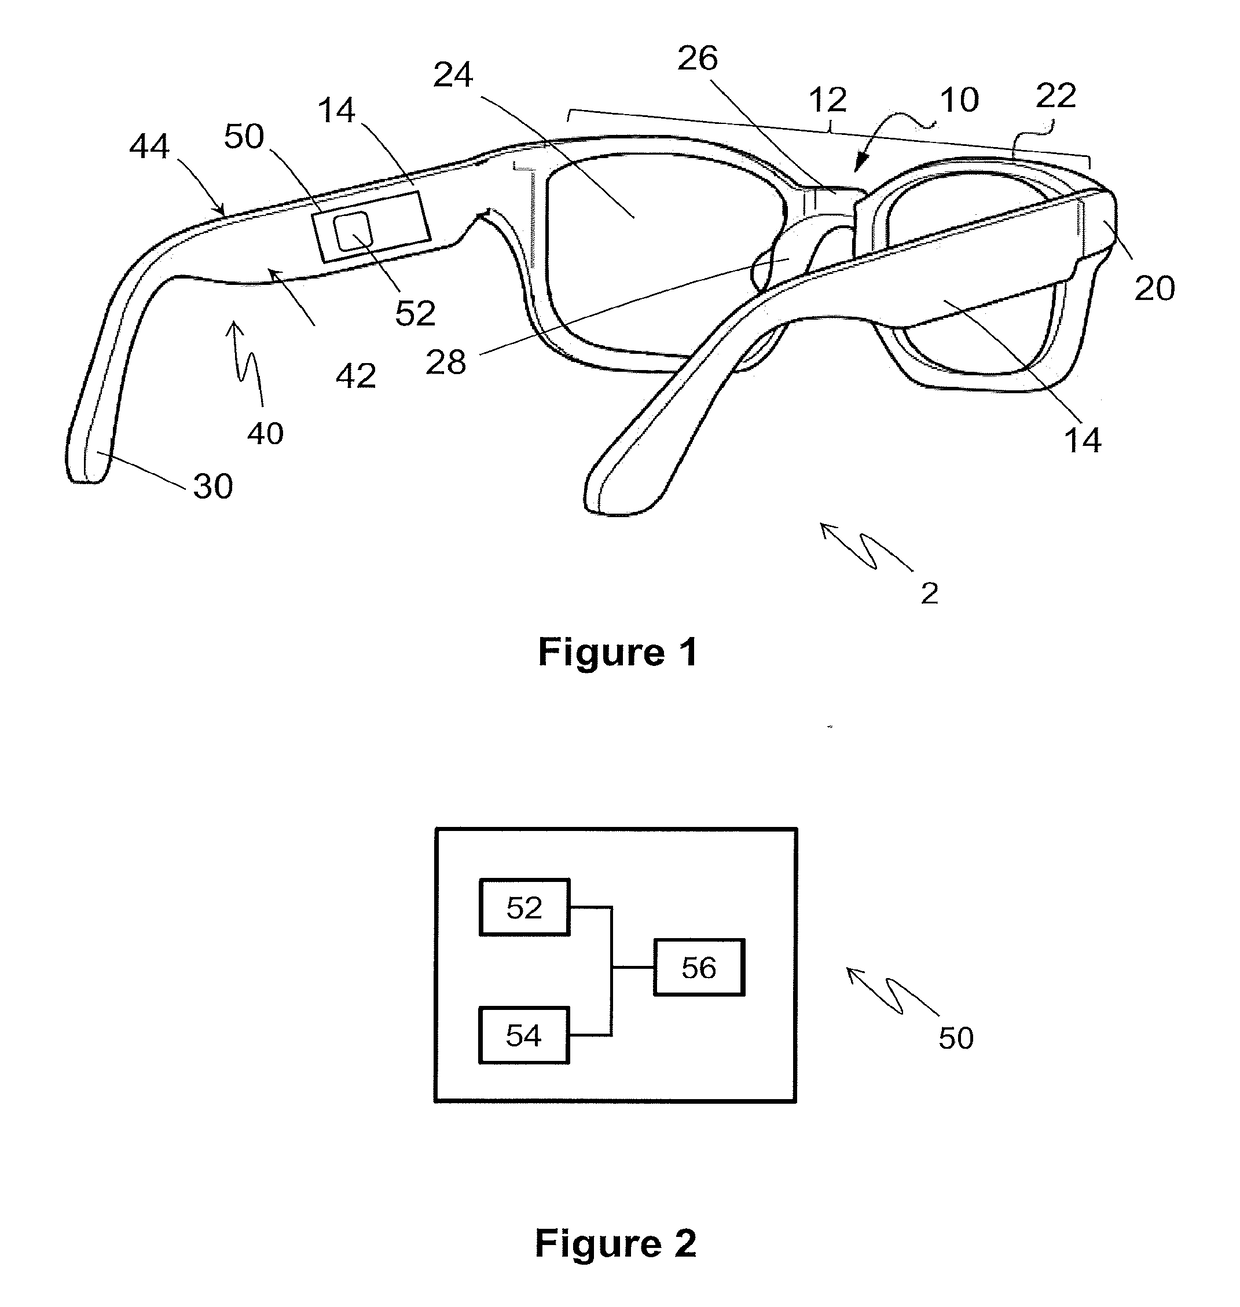 Wearing detection module for spectacle frame